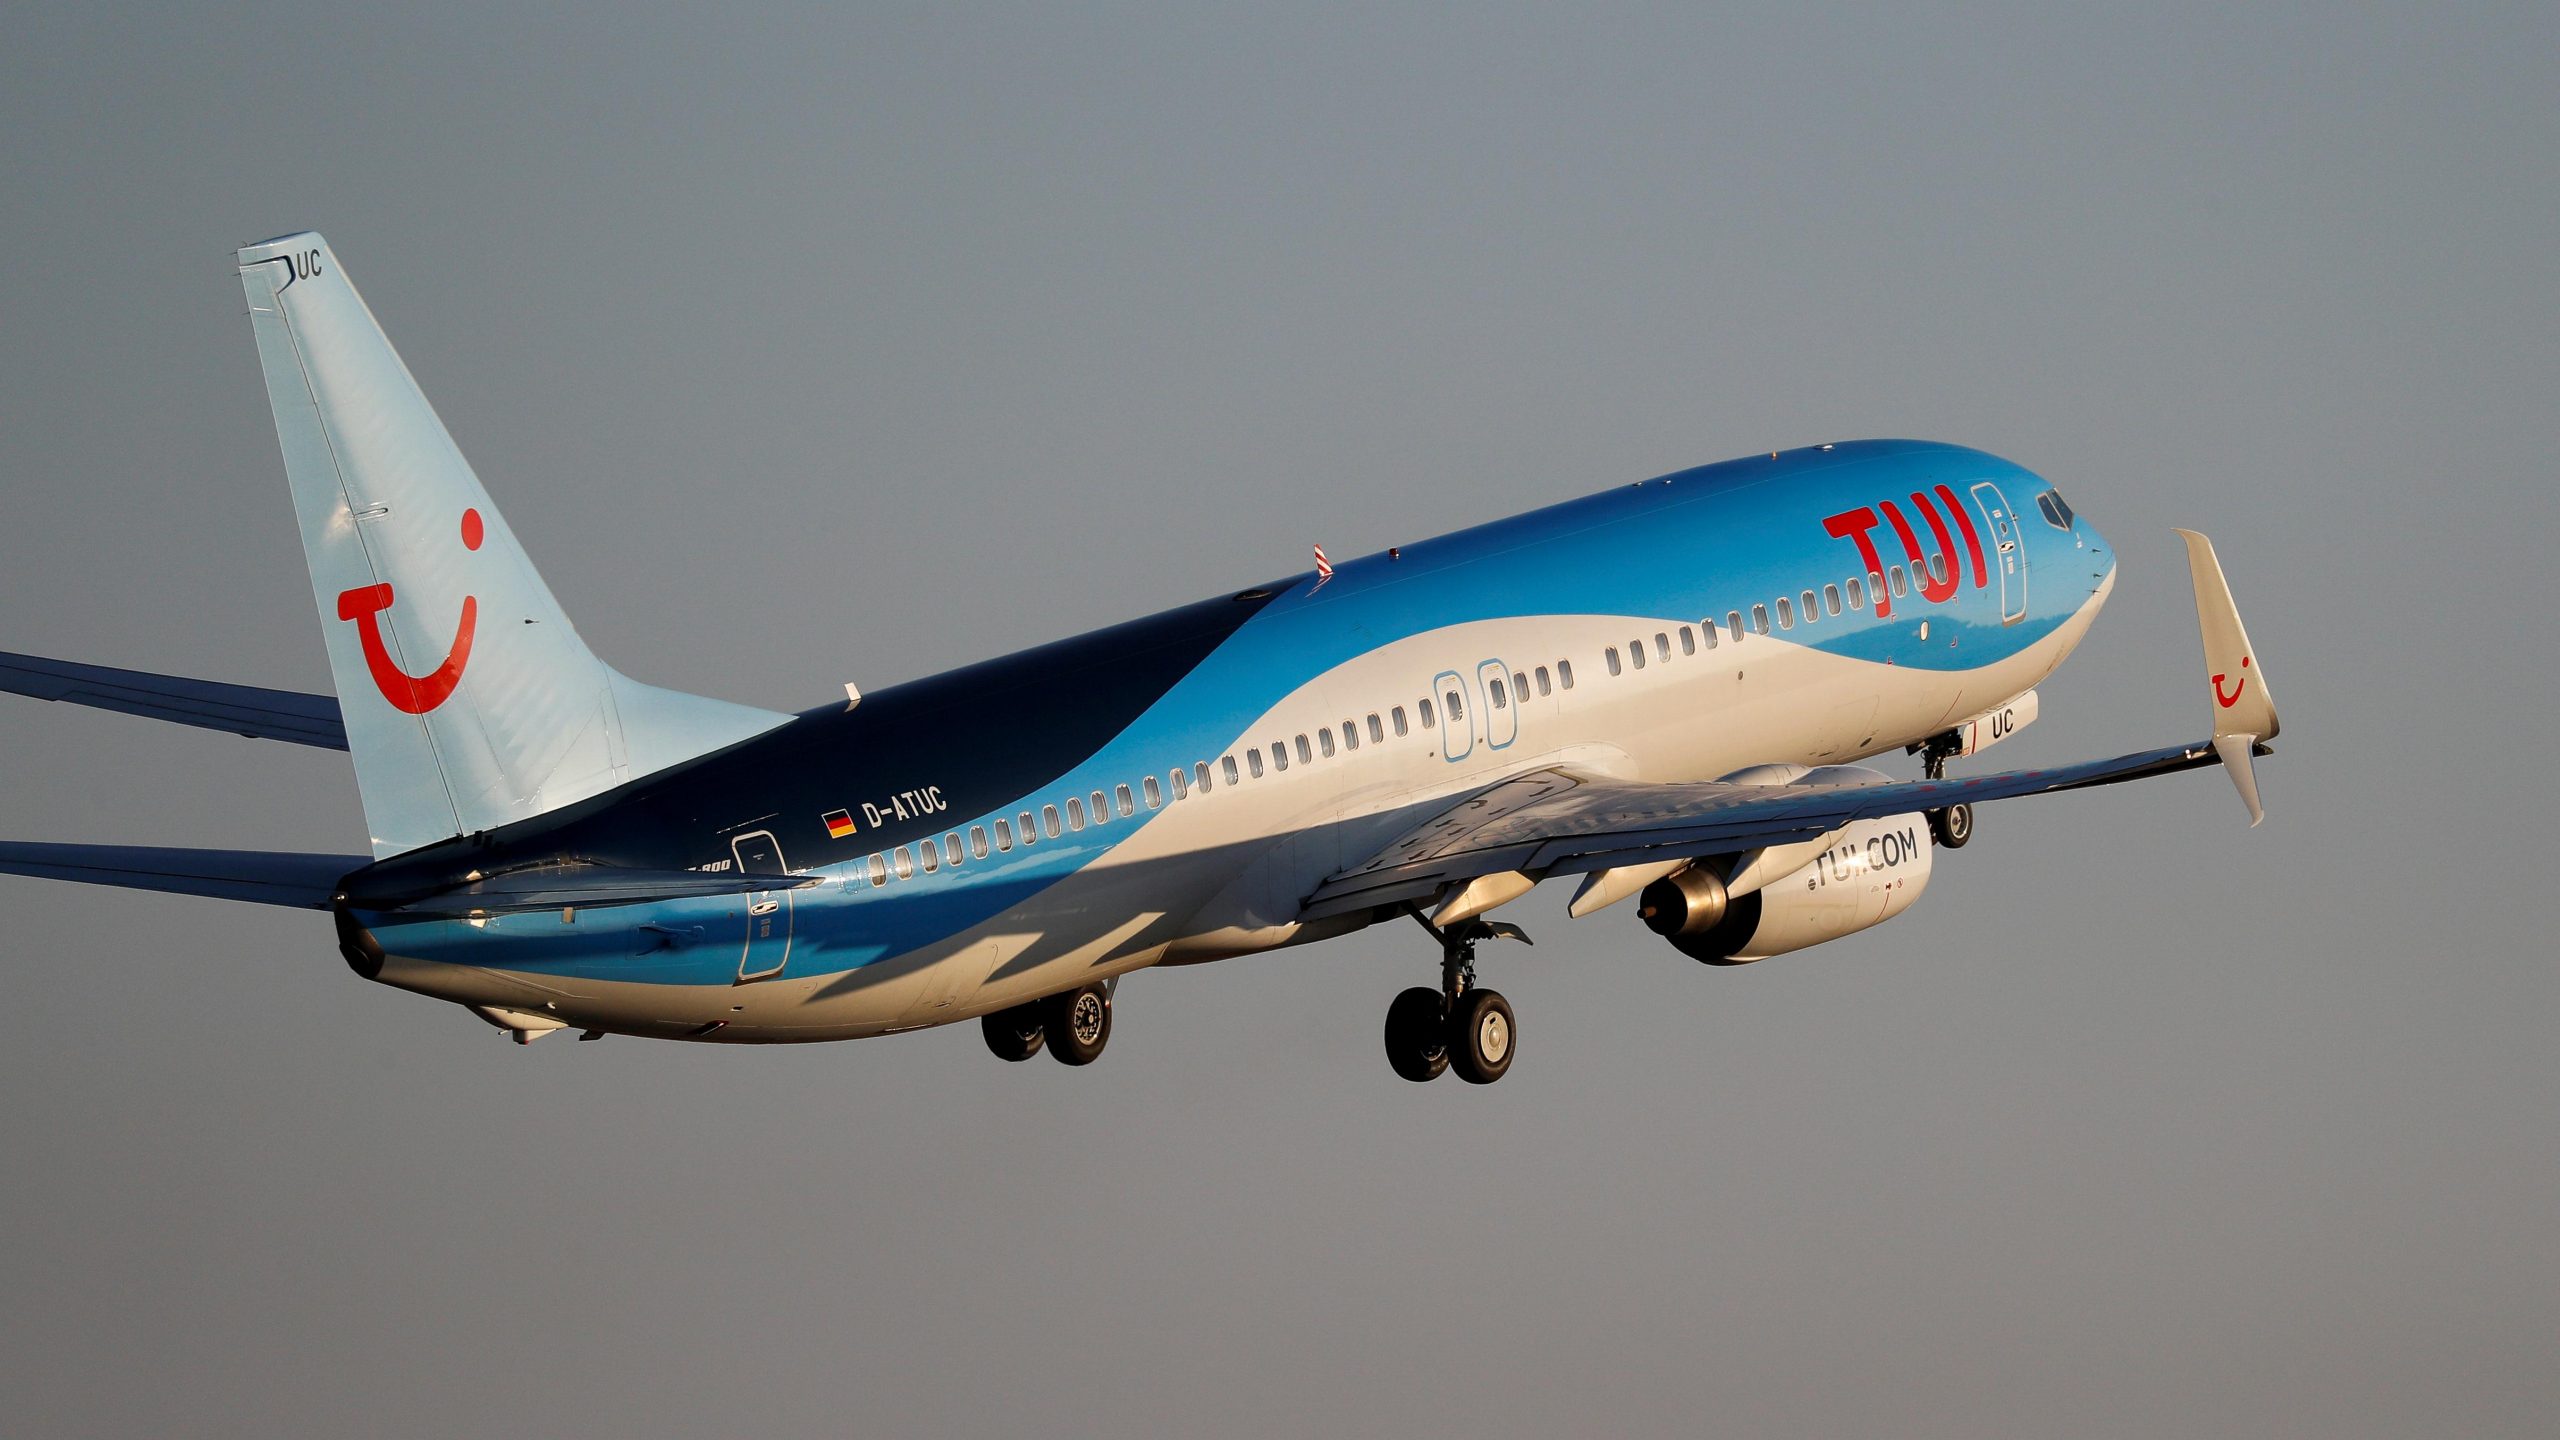 World’s largest travel company, Tui records 1.4bn-euro loss